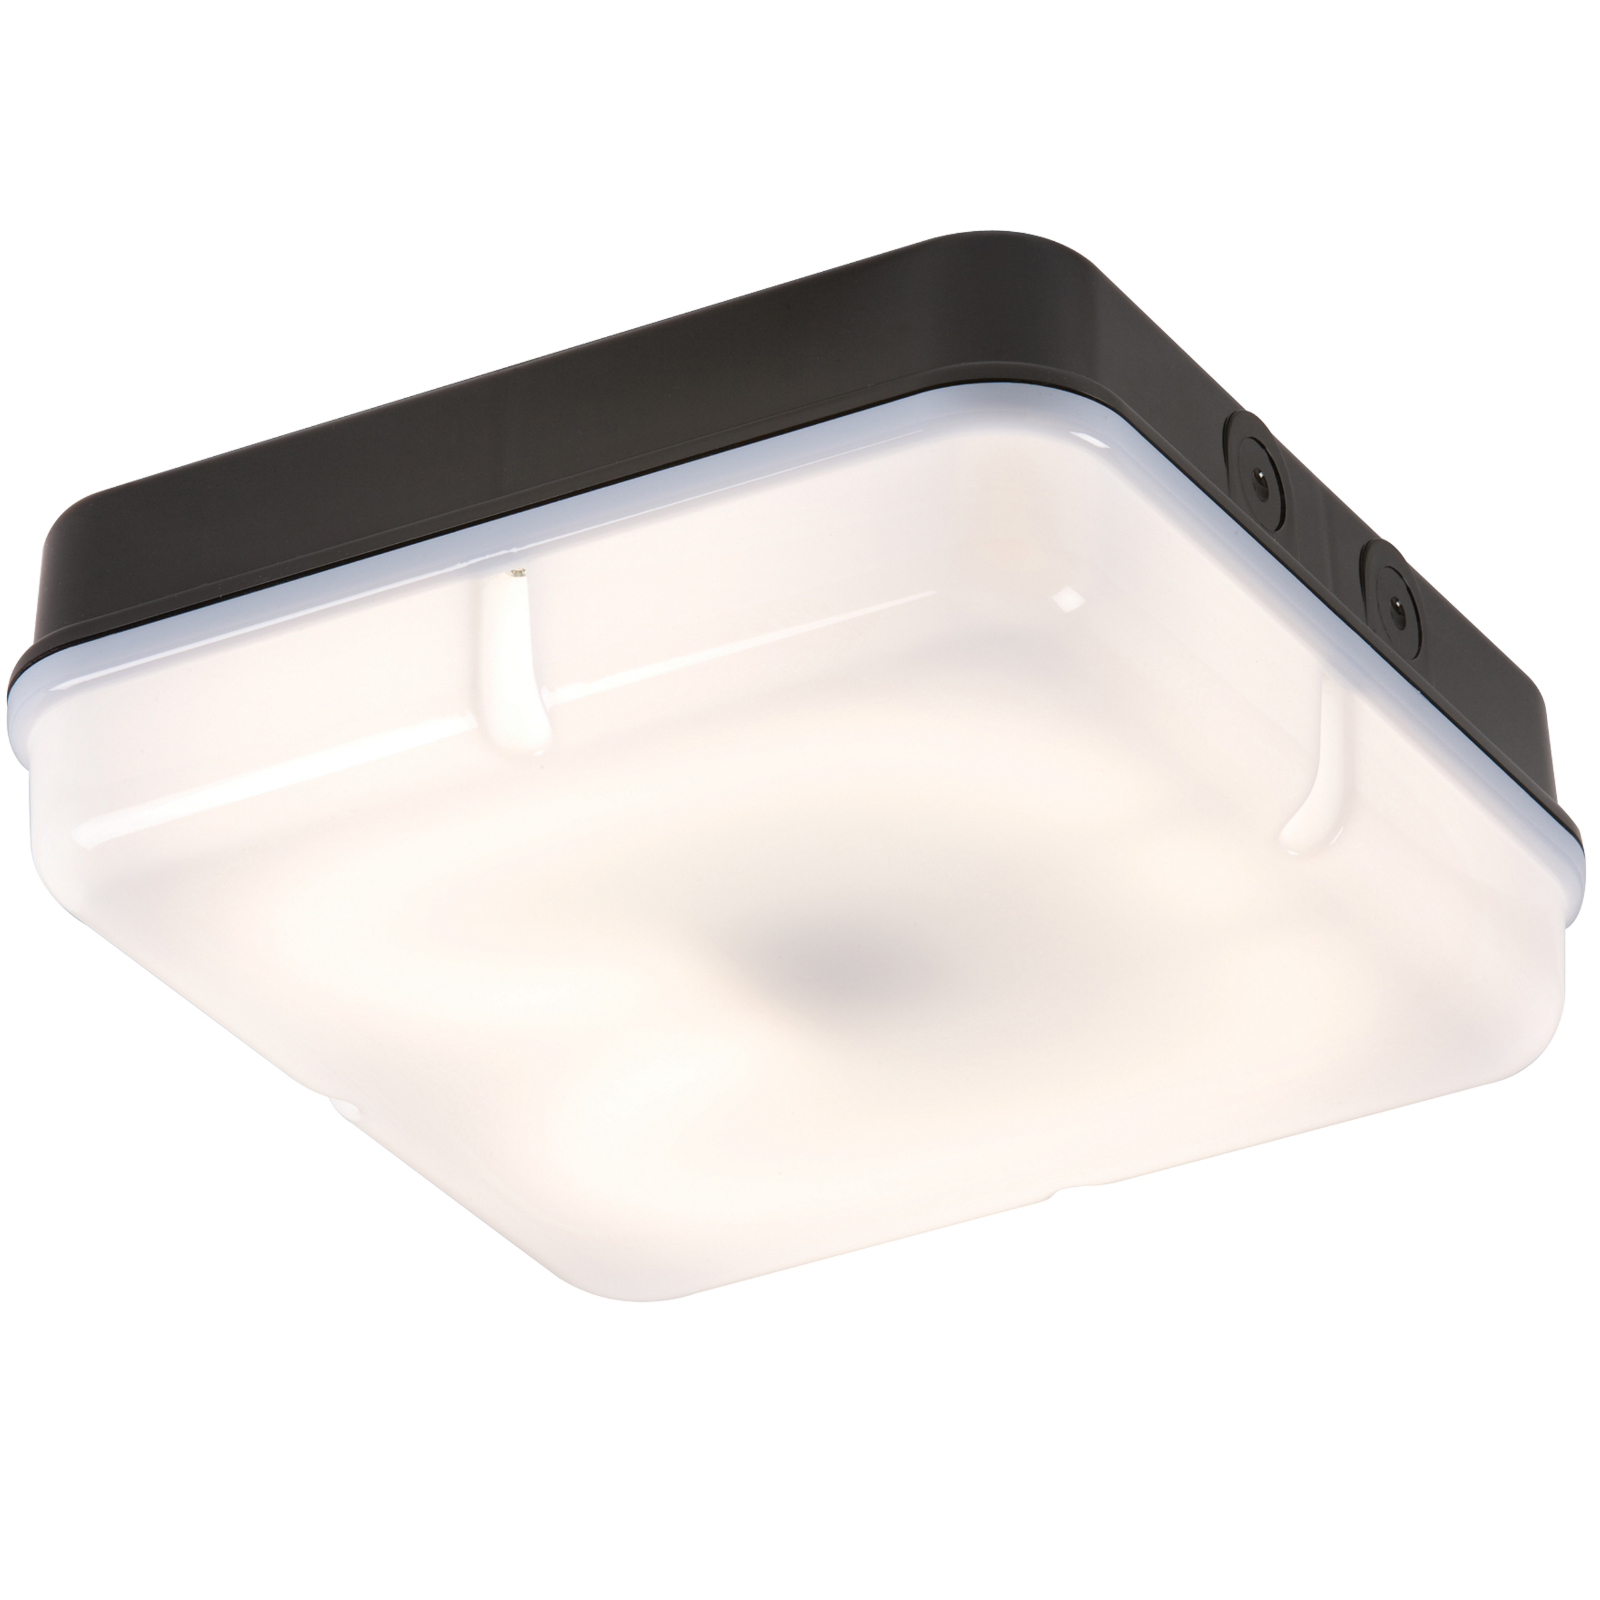 IP65 28W HF Square Bulkhead Comes With Opal Diffuser And Black Base - TPS28BOHF 